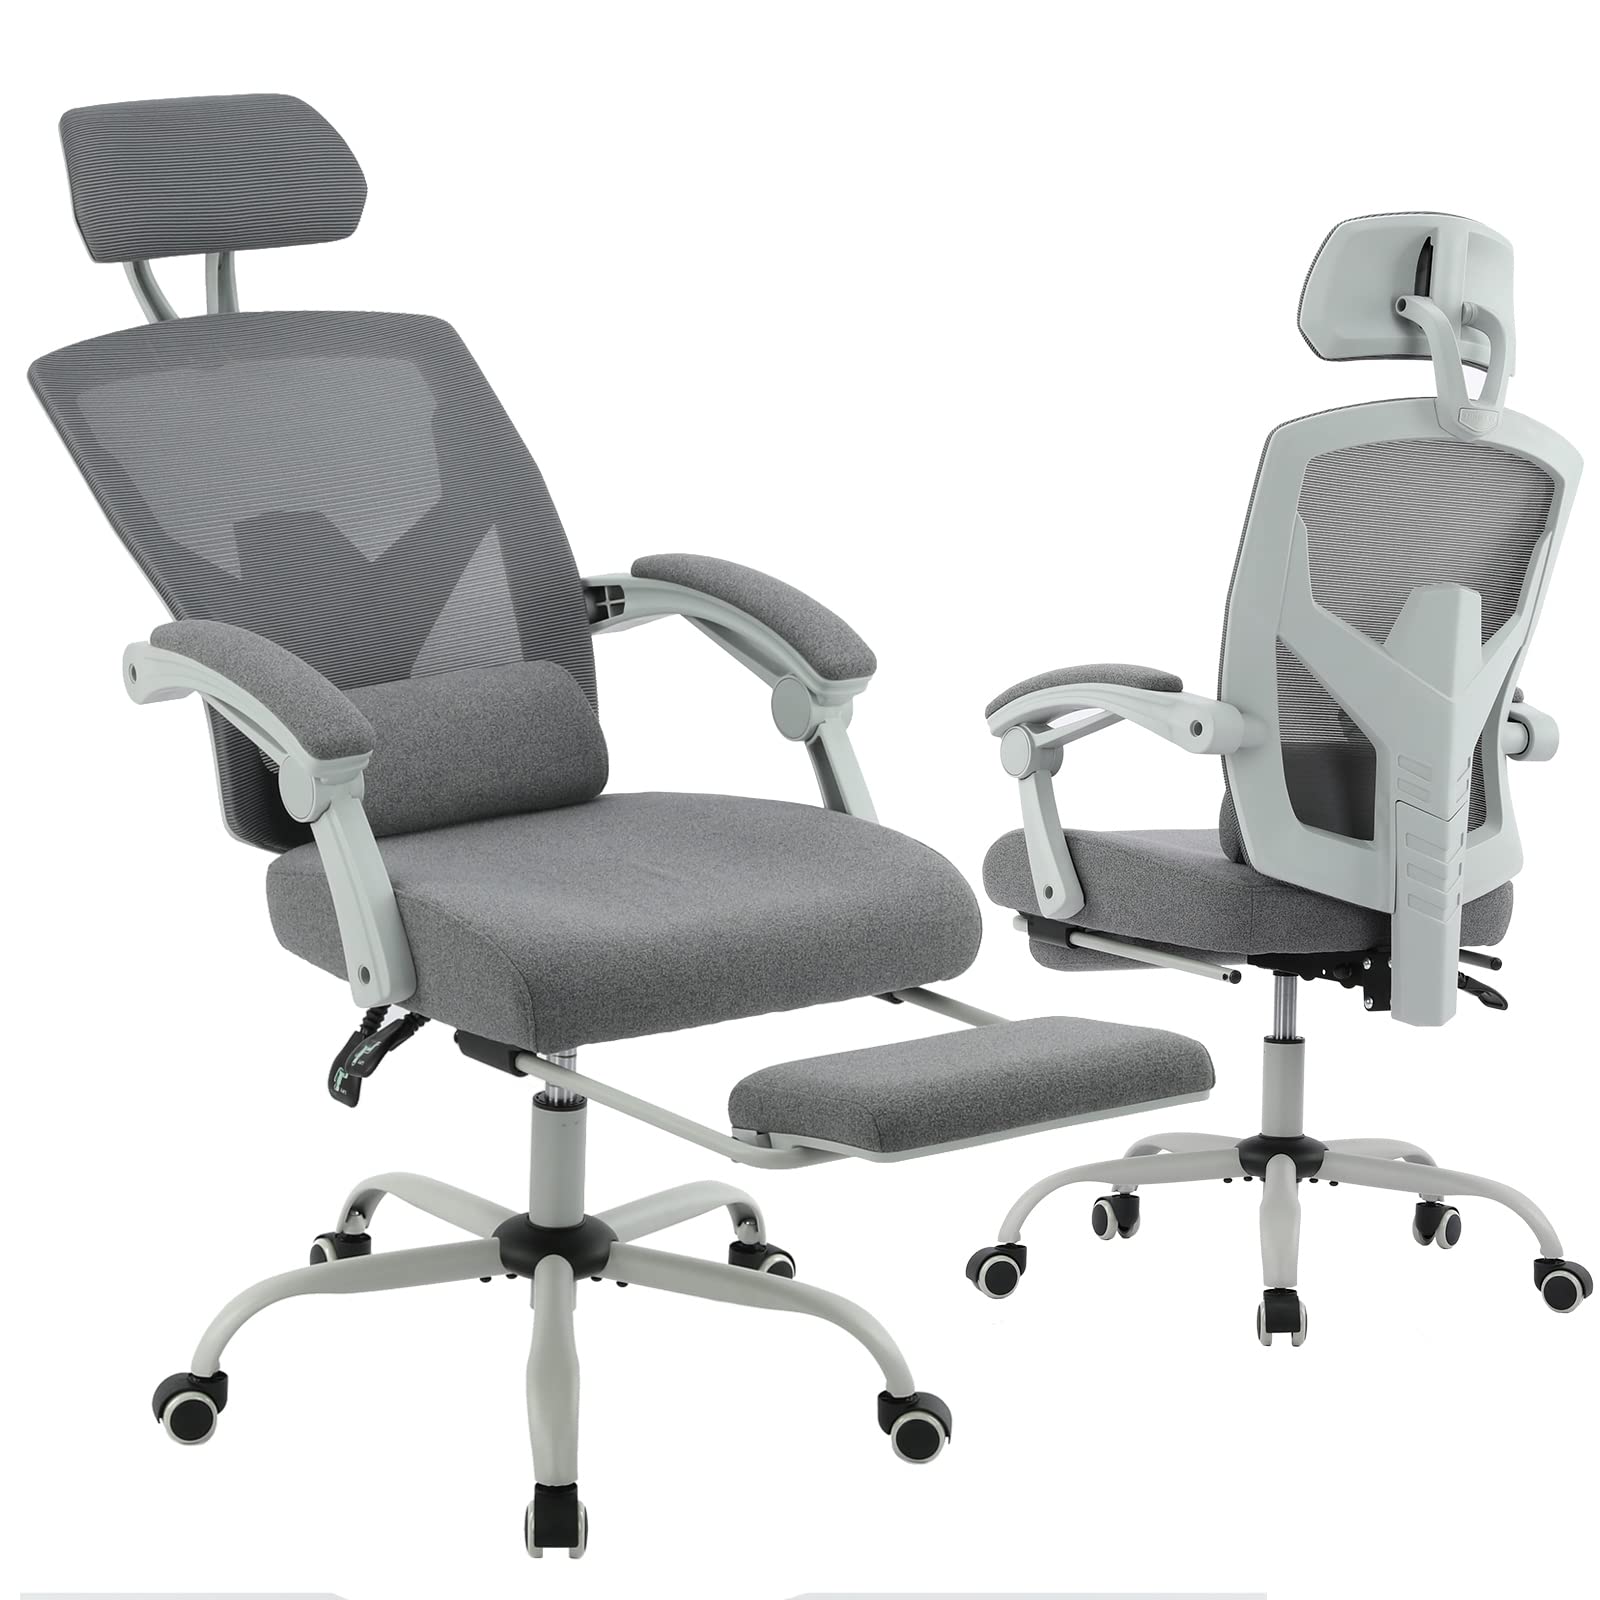 Ergonomic Office Chair, Reclining High Back Mesh Chair, Computer Desk Chair, Swivel Rolling Home Task Chair with Lumbar Support Pillow, Adjustable Headrest, Retractable Footrest Only $99.99